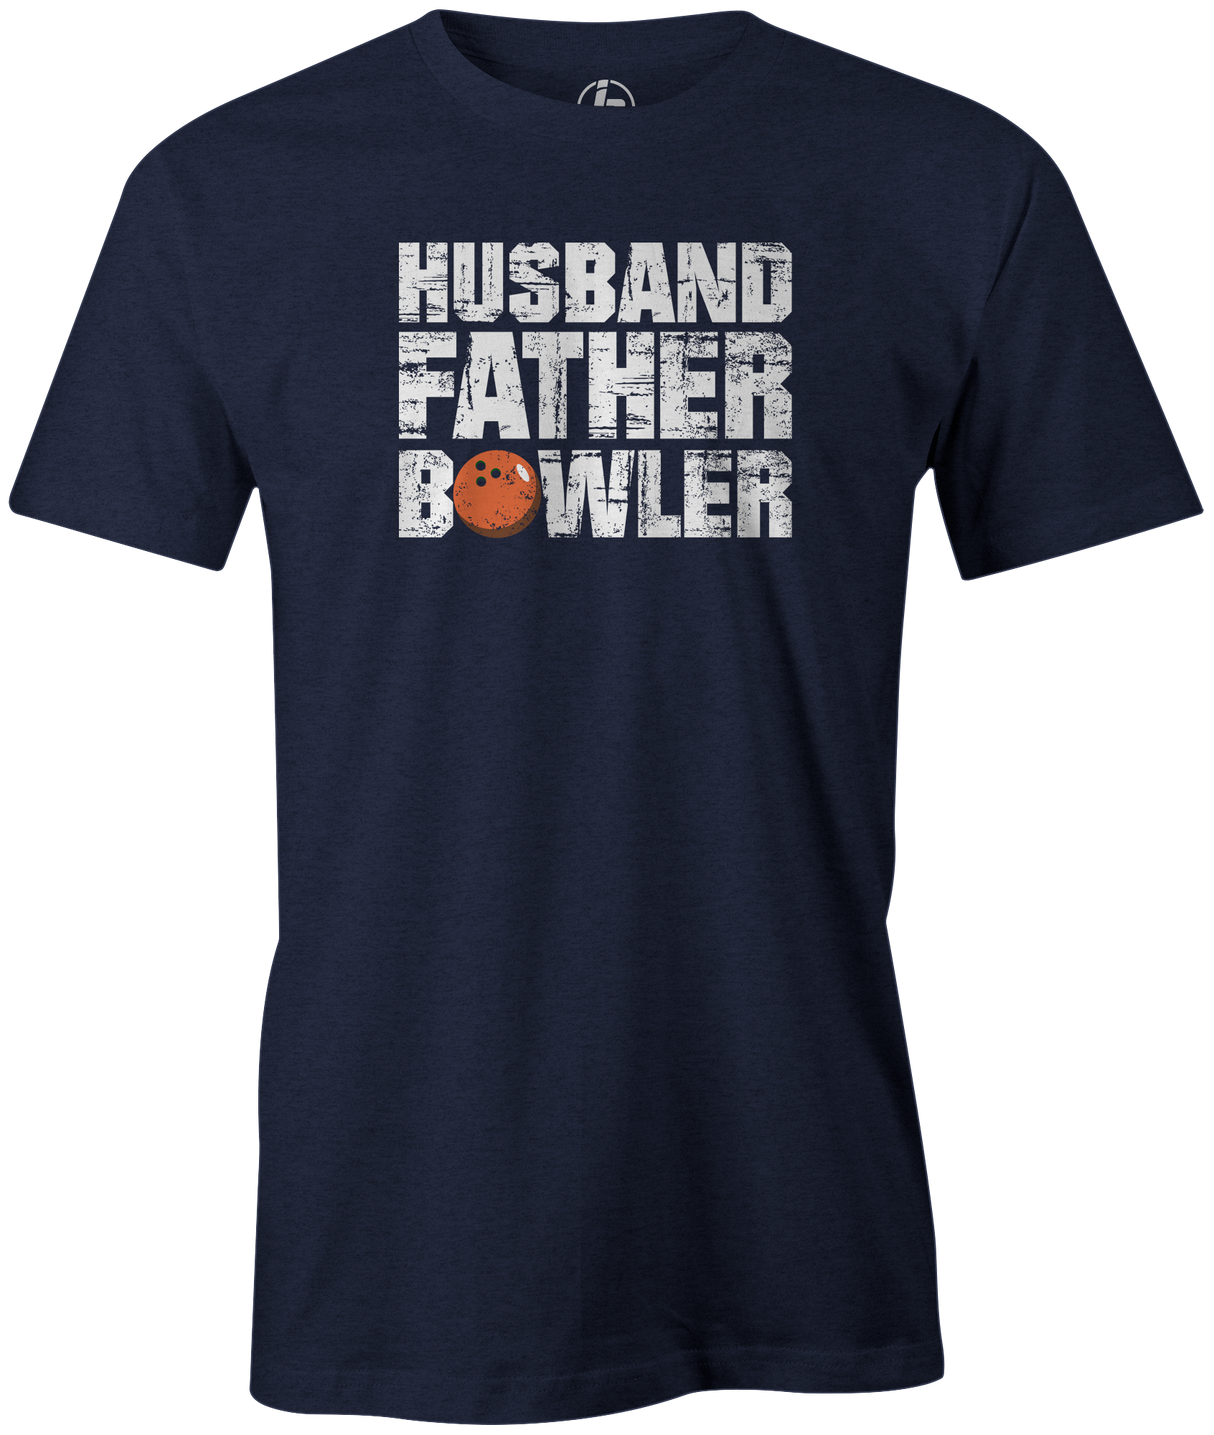 Husband, Father, Bowler Men's Bowling shirt, navy, tee, tee-shirt, tee shirt, apparel, merch, cool, funny, vintage, father's day, gift, present, cheap, discount, free shipping.